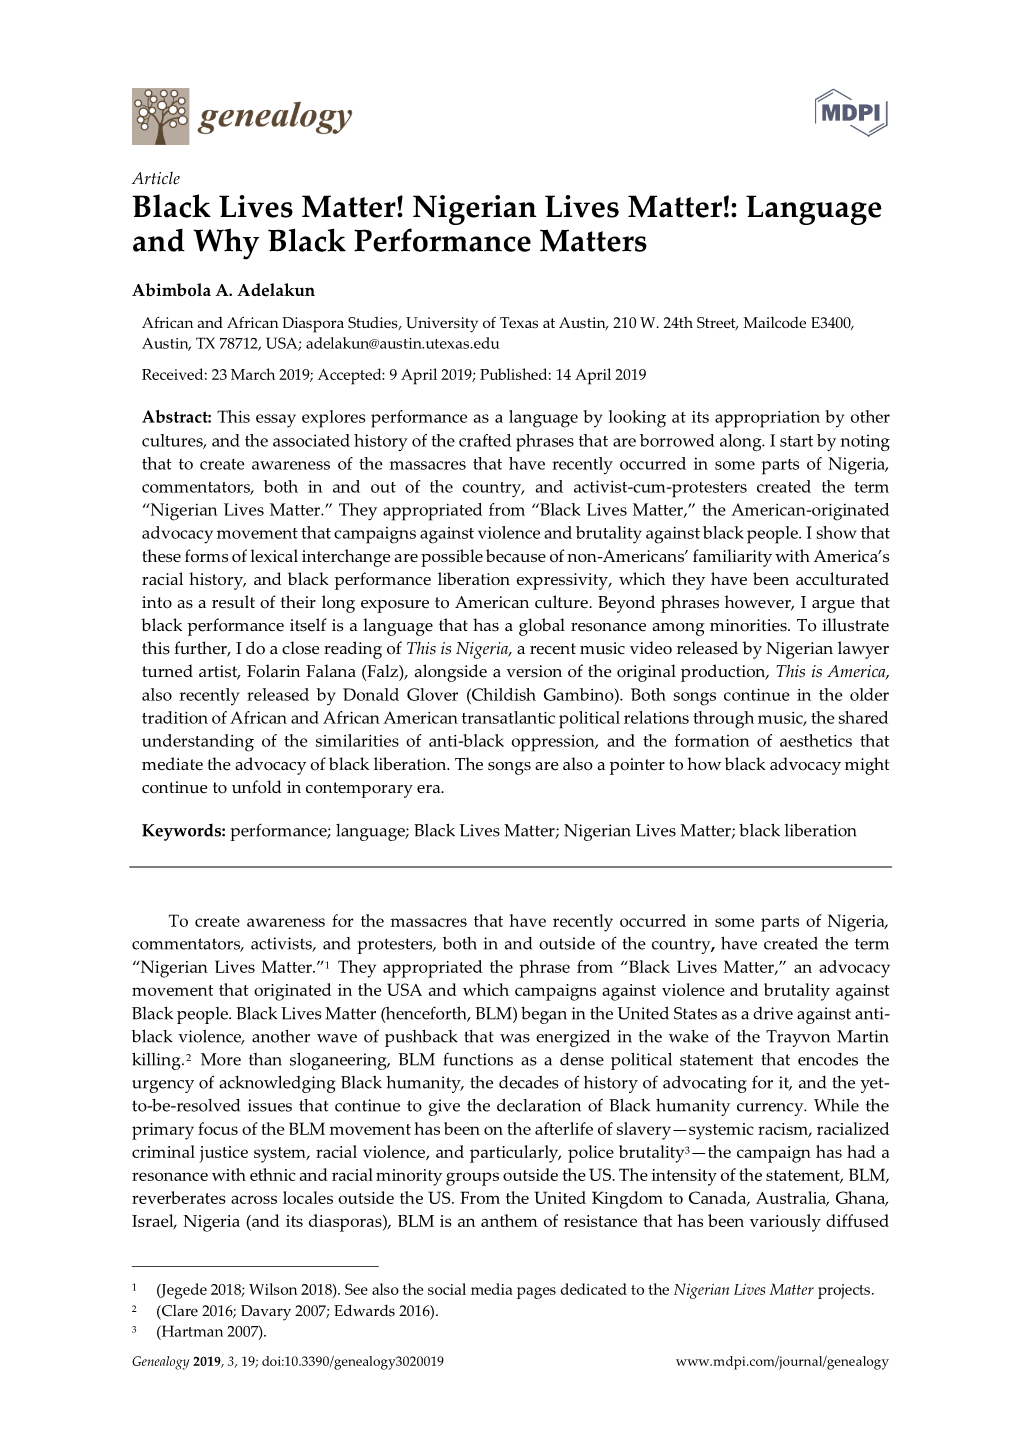 Nigerian Lives Matter!: Language and Why Black Performance Matters